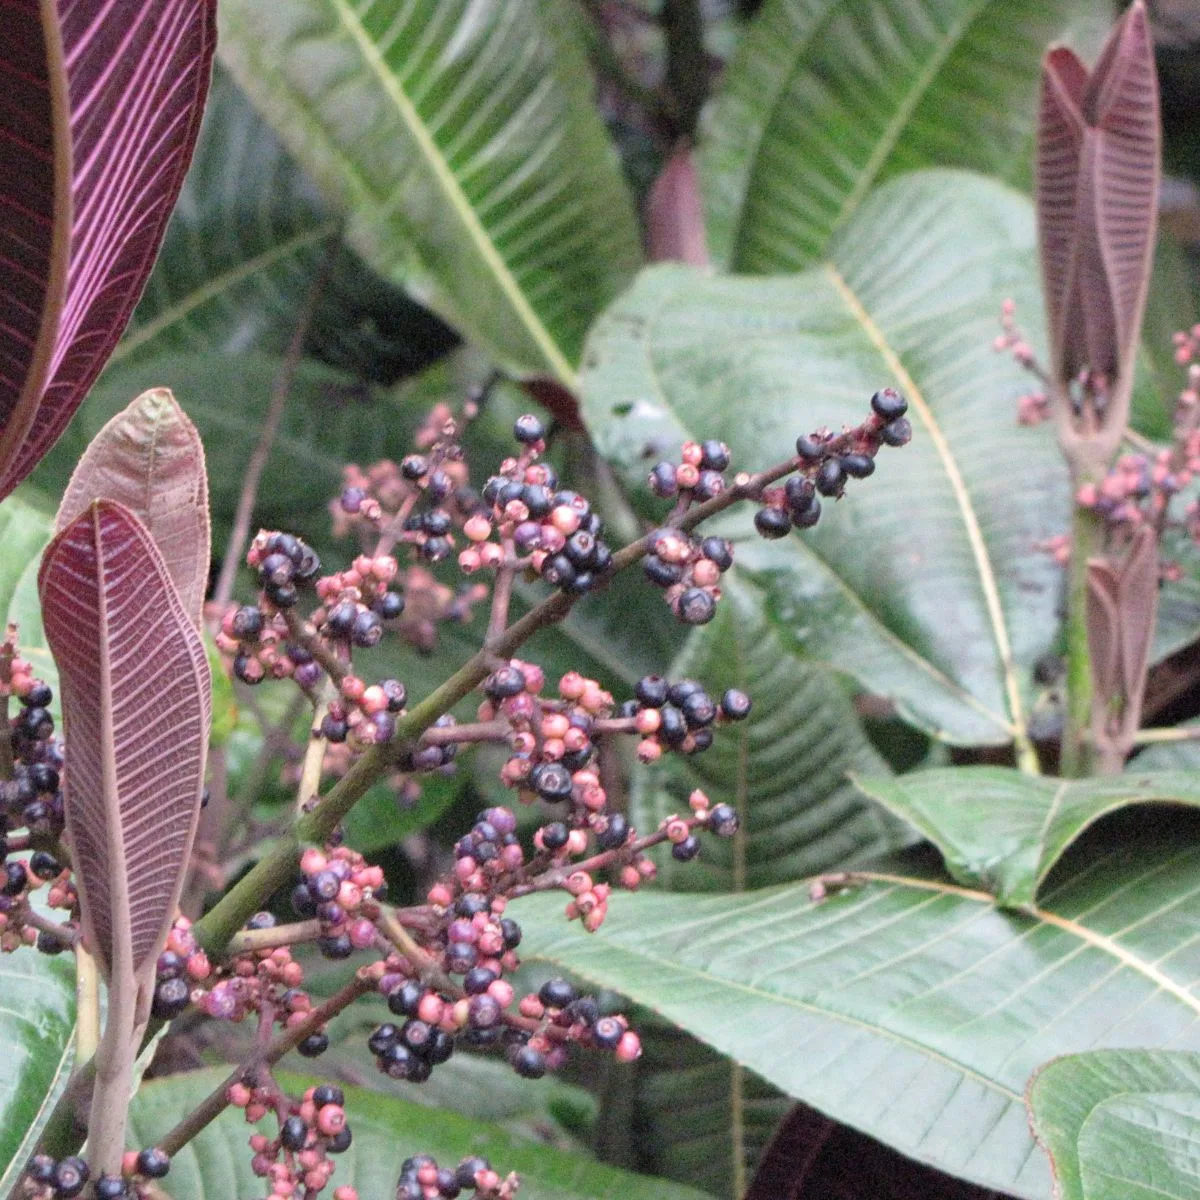 Miconia calvescens leaves and berries